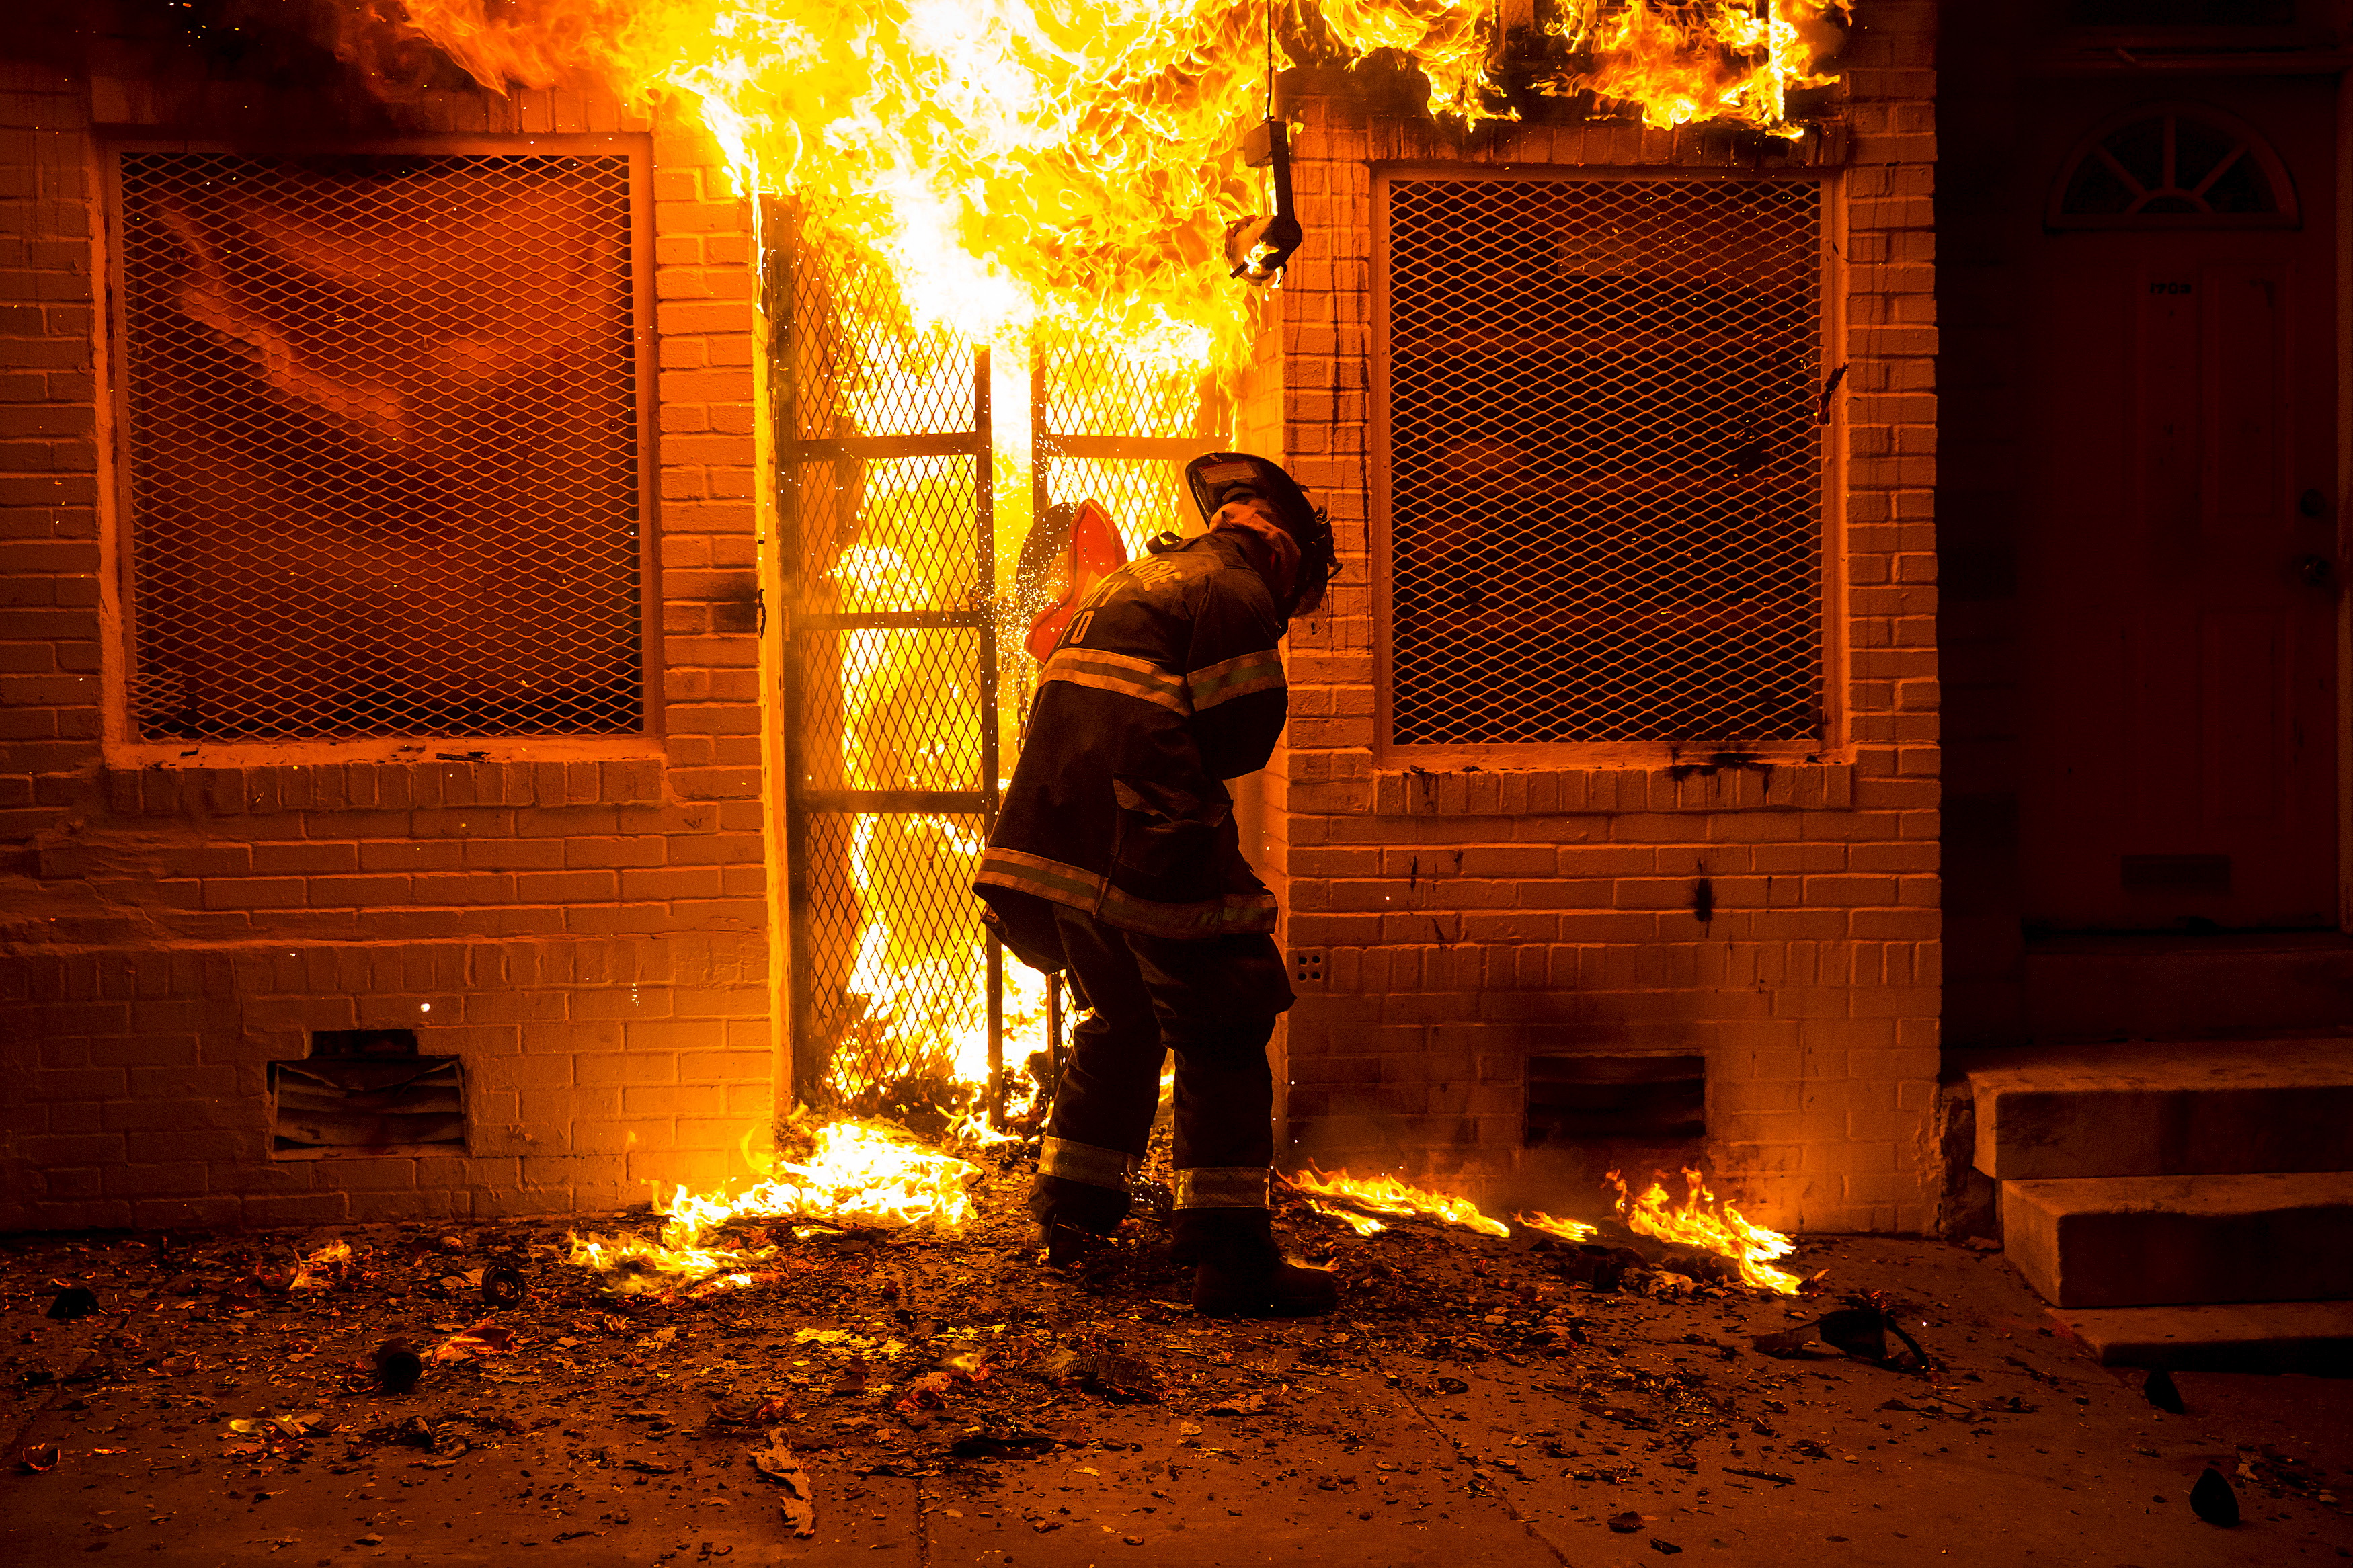 A firefighter uses a saw to open a metal gate while fighting a fire in a convenience store and residence during clashes after the funeral of Freddie Gray in Baltimore, Maryland